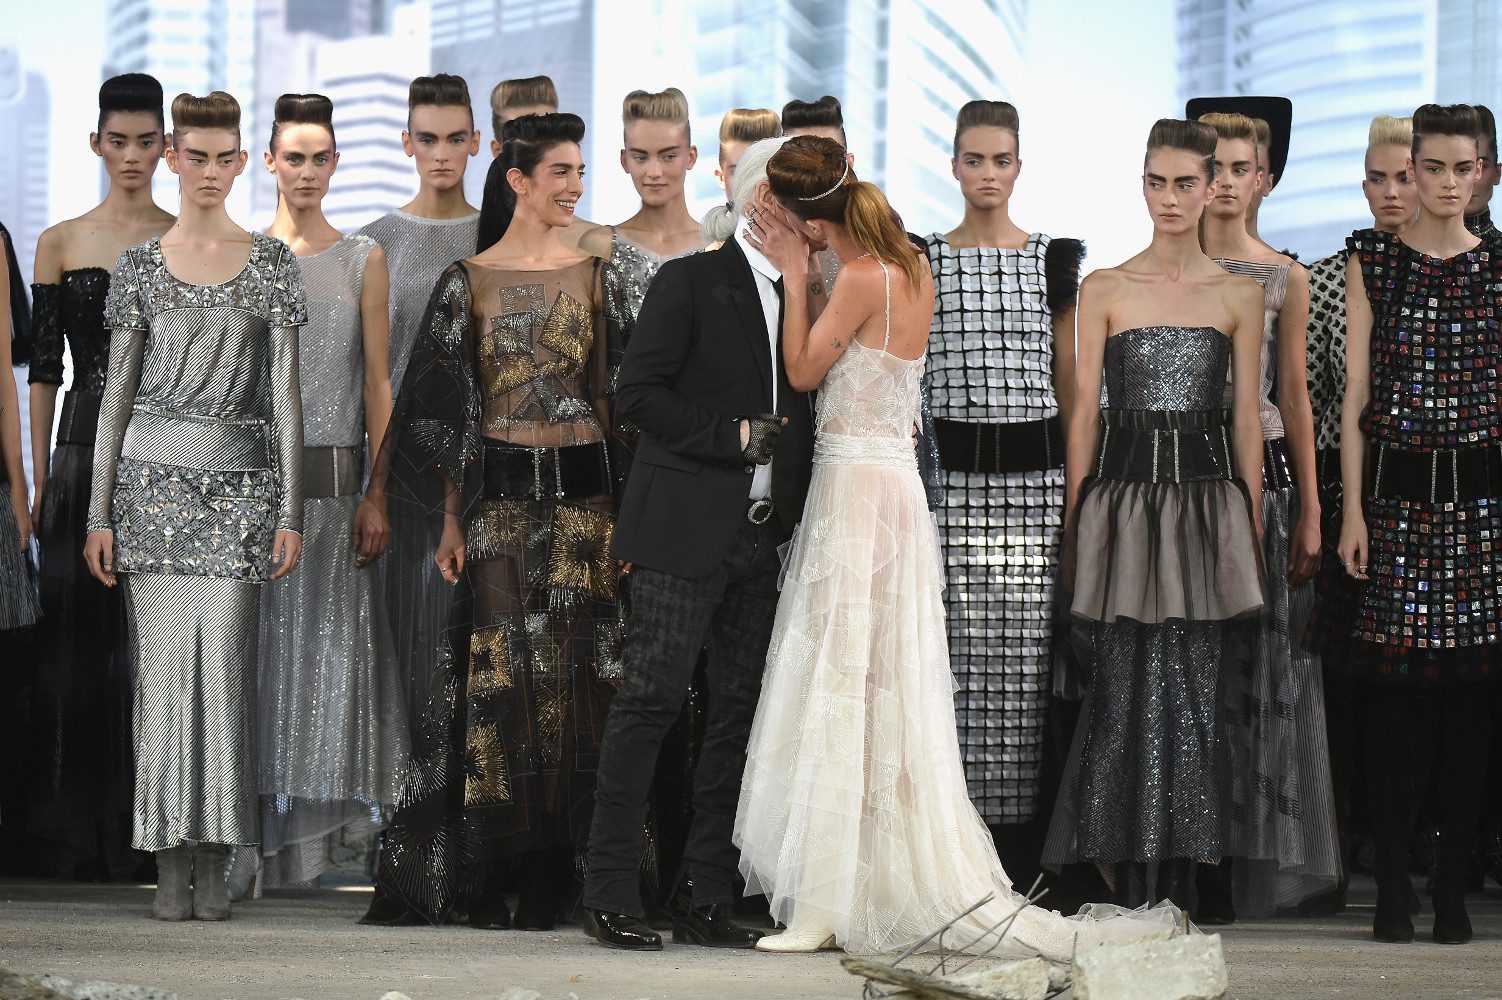 Karl Lagerfeld & the models at Chanel Haute Couture Fall 2013